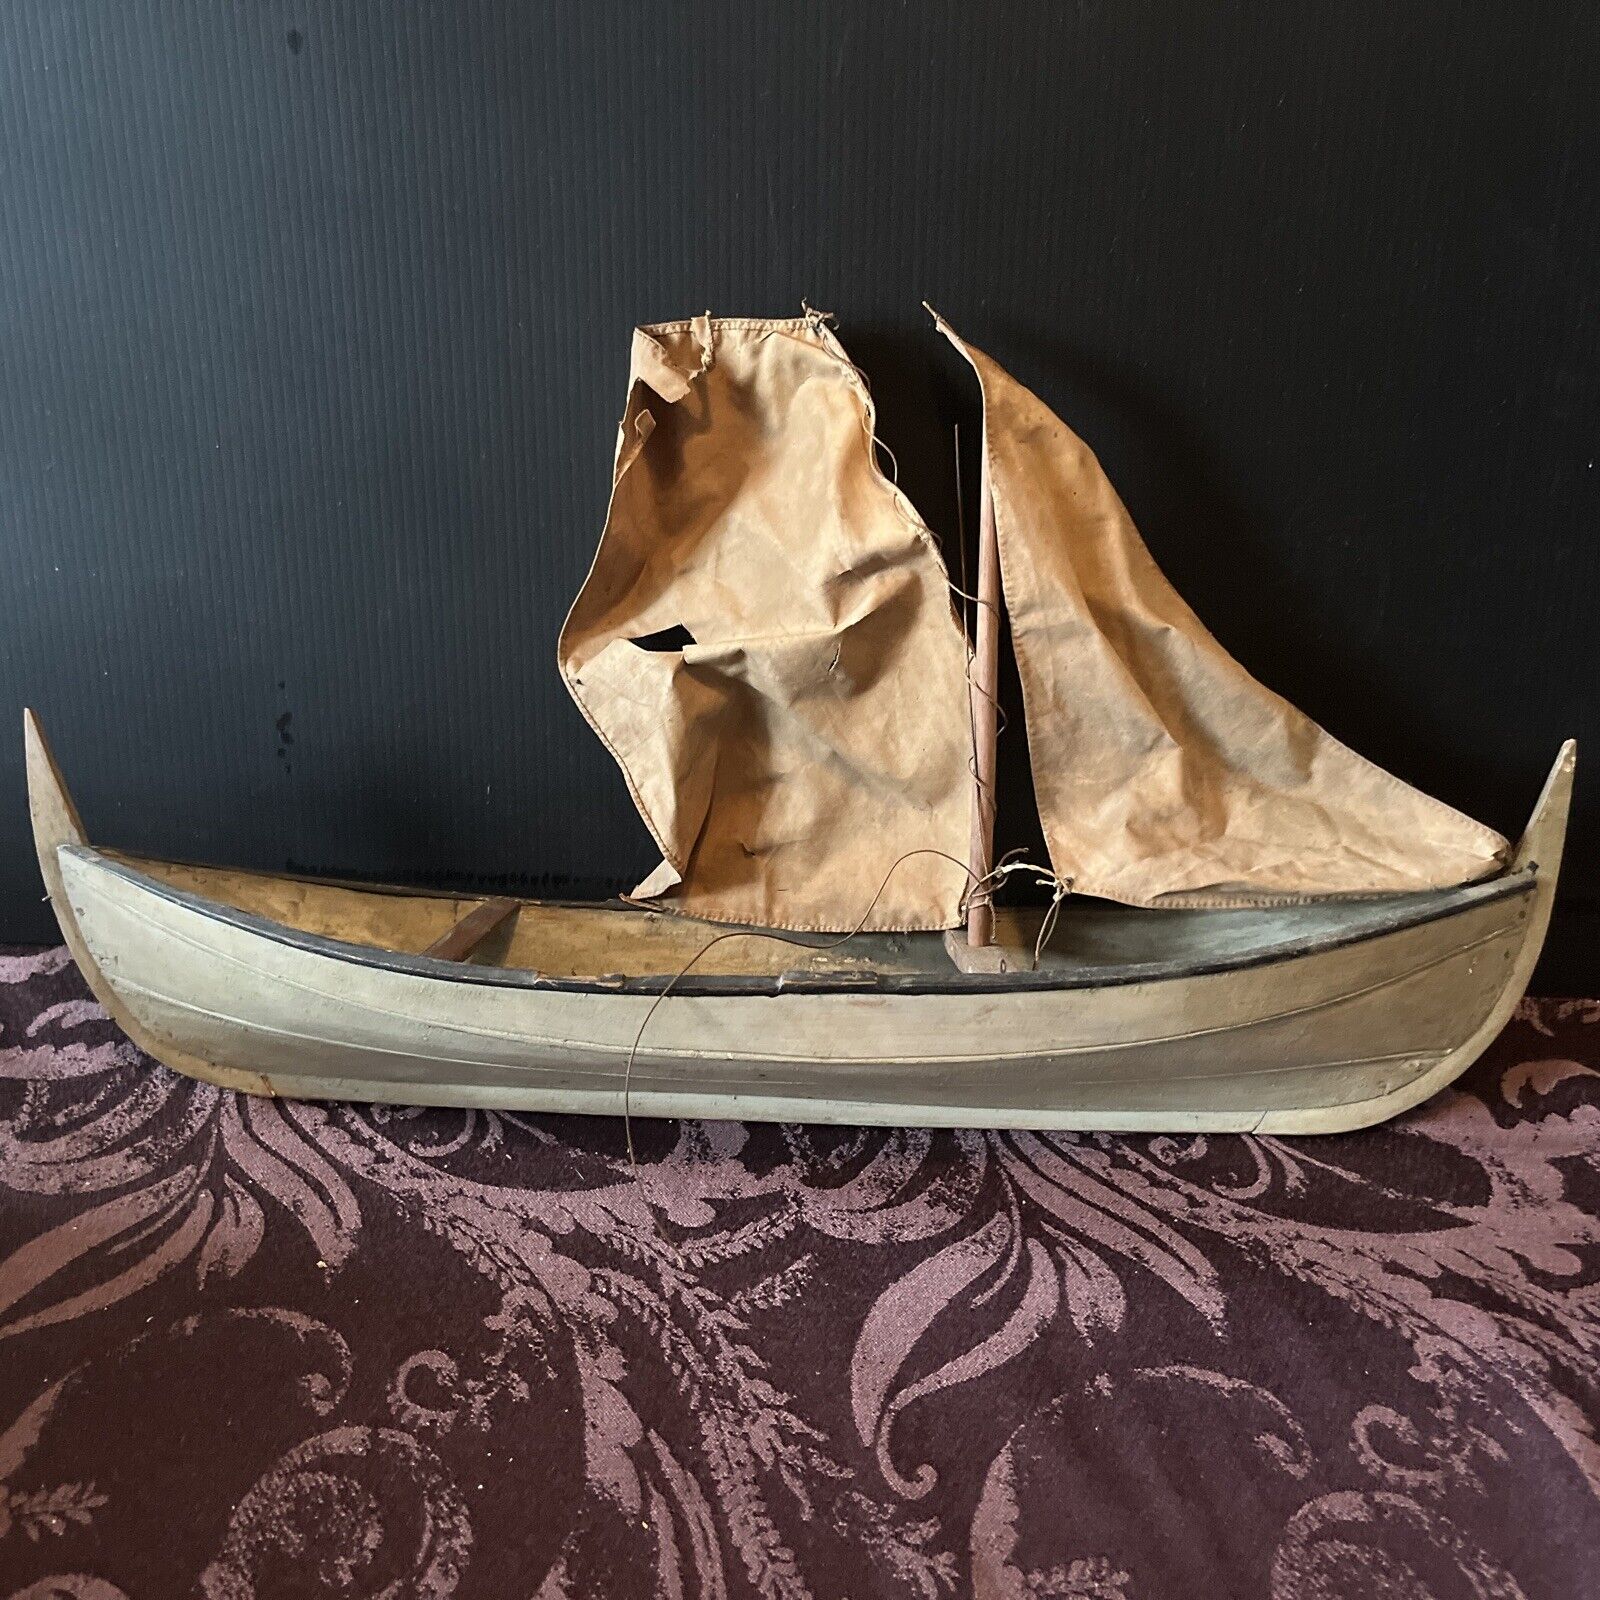 Vintage American Handcrafted 19” Canoe Boat with Sail Model Folk Art Provenance